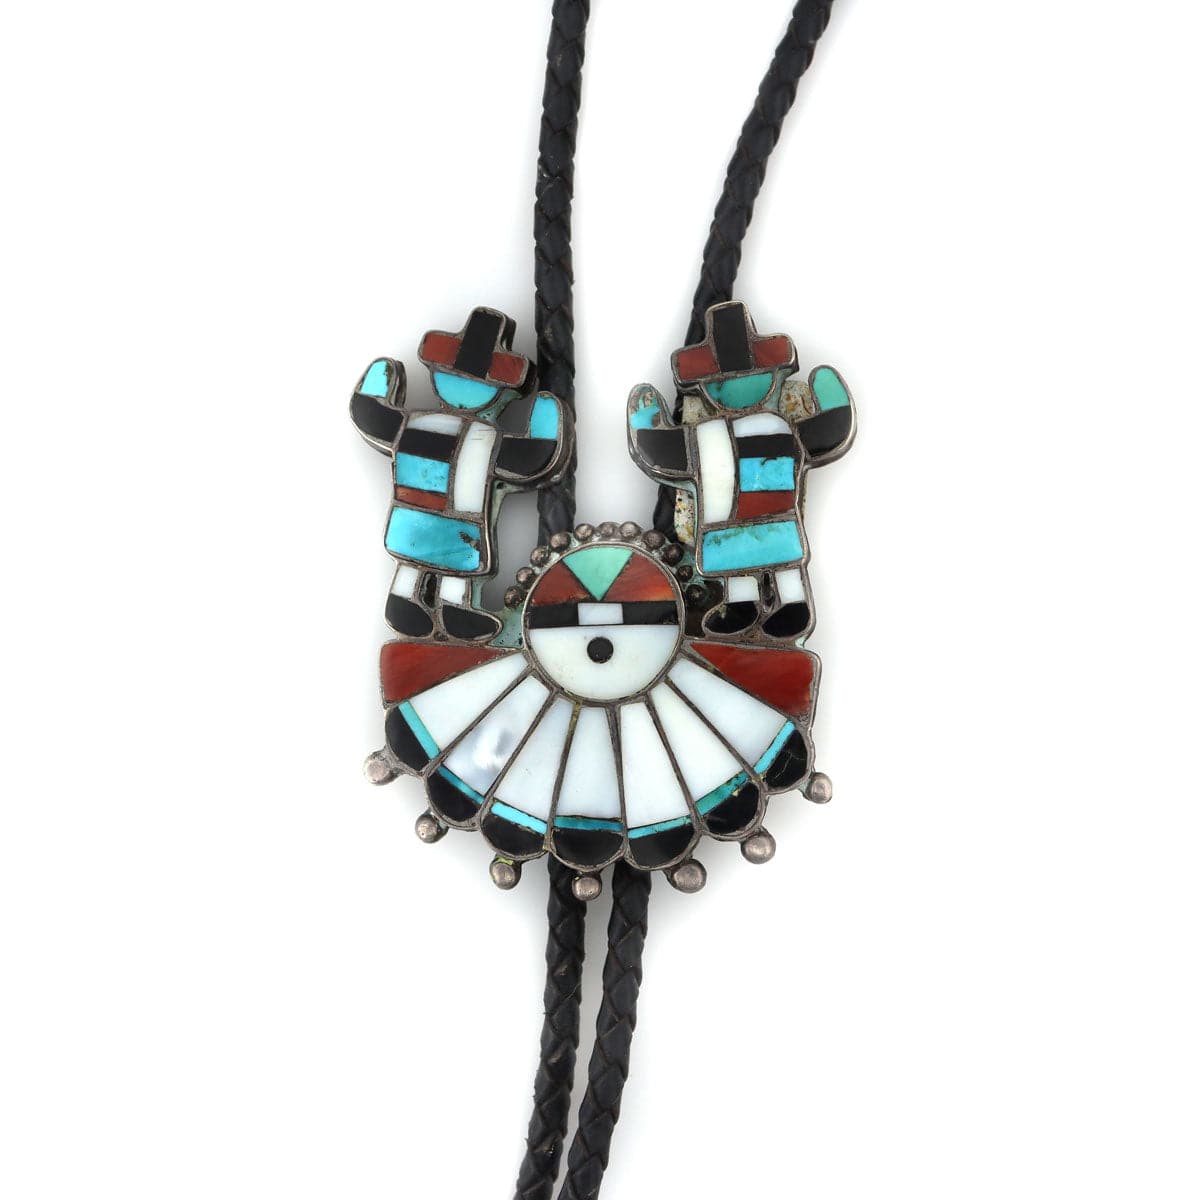 K. Martinez â€“ Zuni Multi-Stone Channel Inlay, Silver, and Leather Bolo Tie with Sunface Kachina and Rainbow God Design c. 1950-60s, 2.5" x 2.25" (J91051-0821-030)1